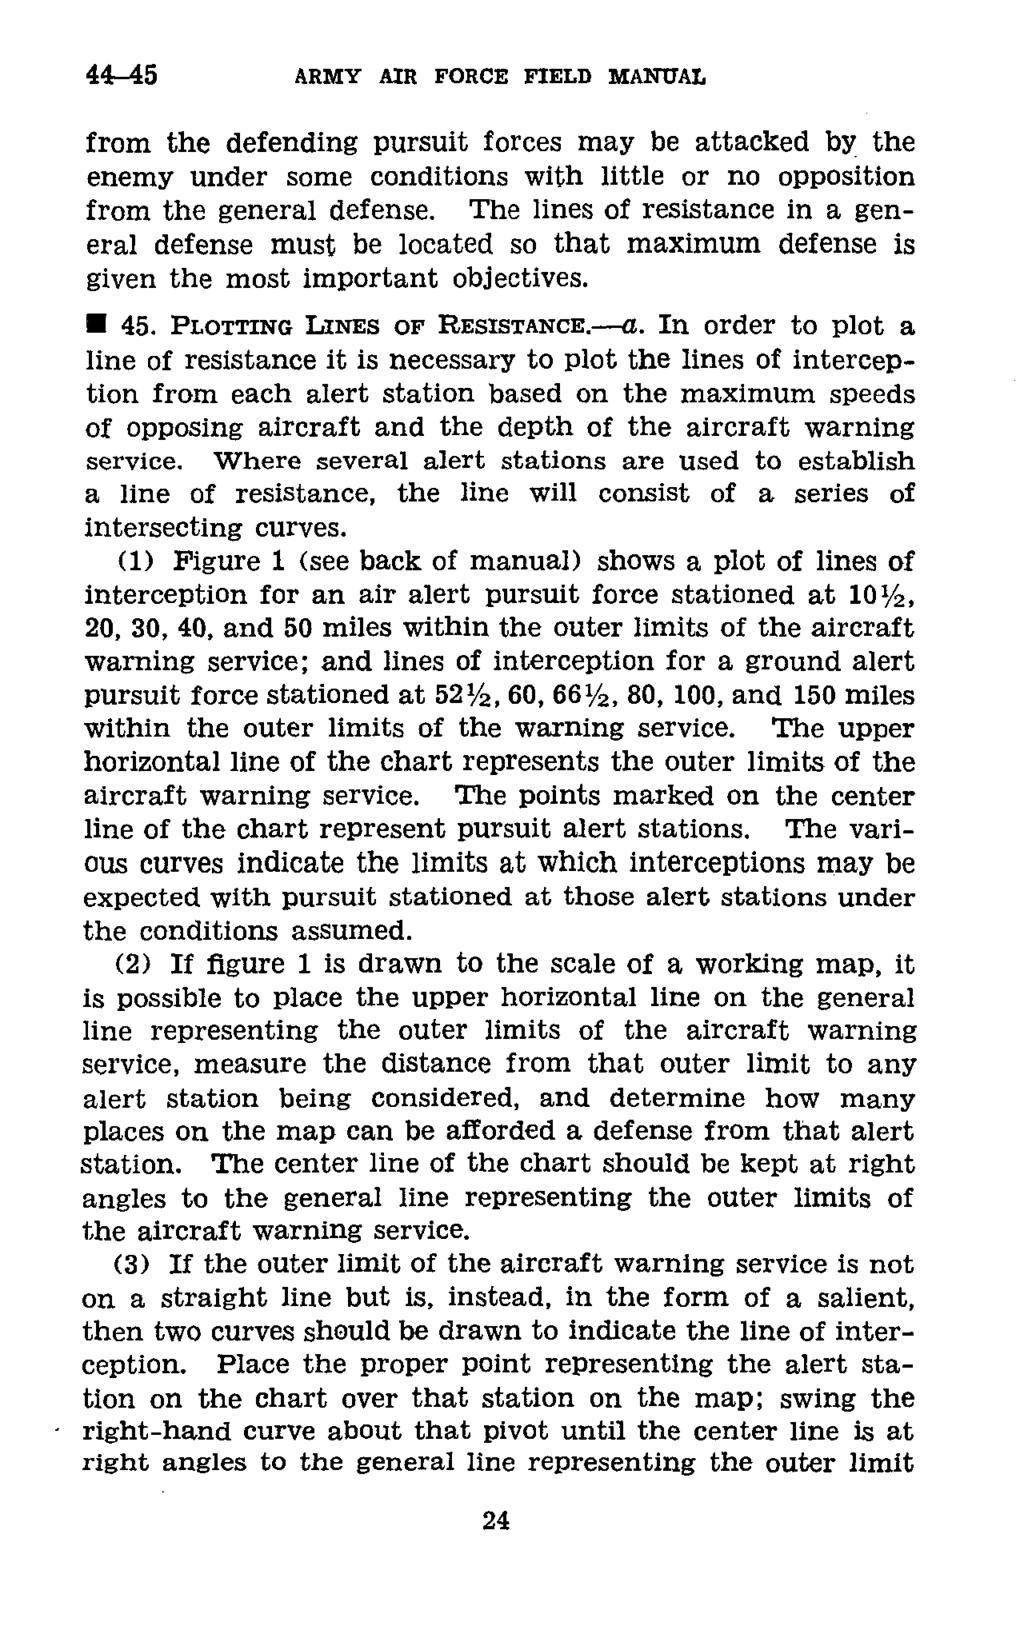 44-45 ARMY AIR FORCE FIELD MANUAL from the defending pursuit forces may be attacked by the enemy under some conditions with little or no opposition from the general defense.